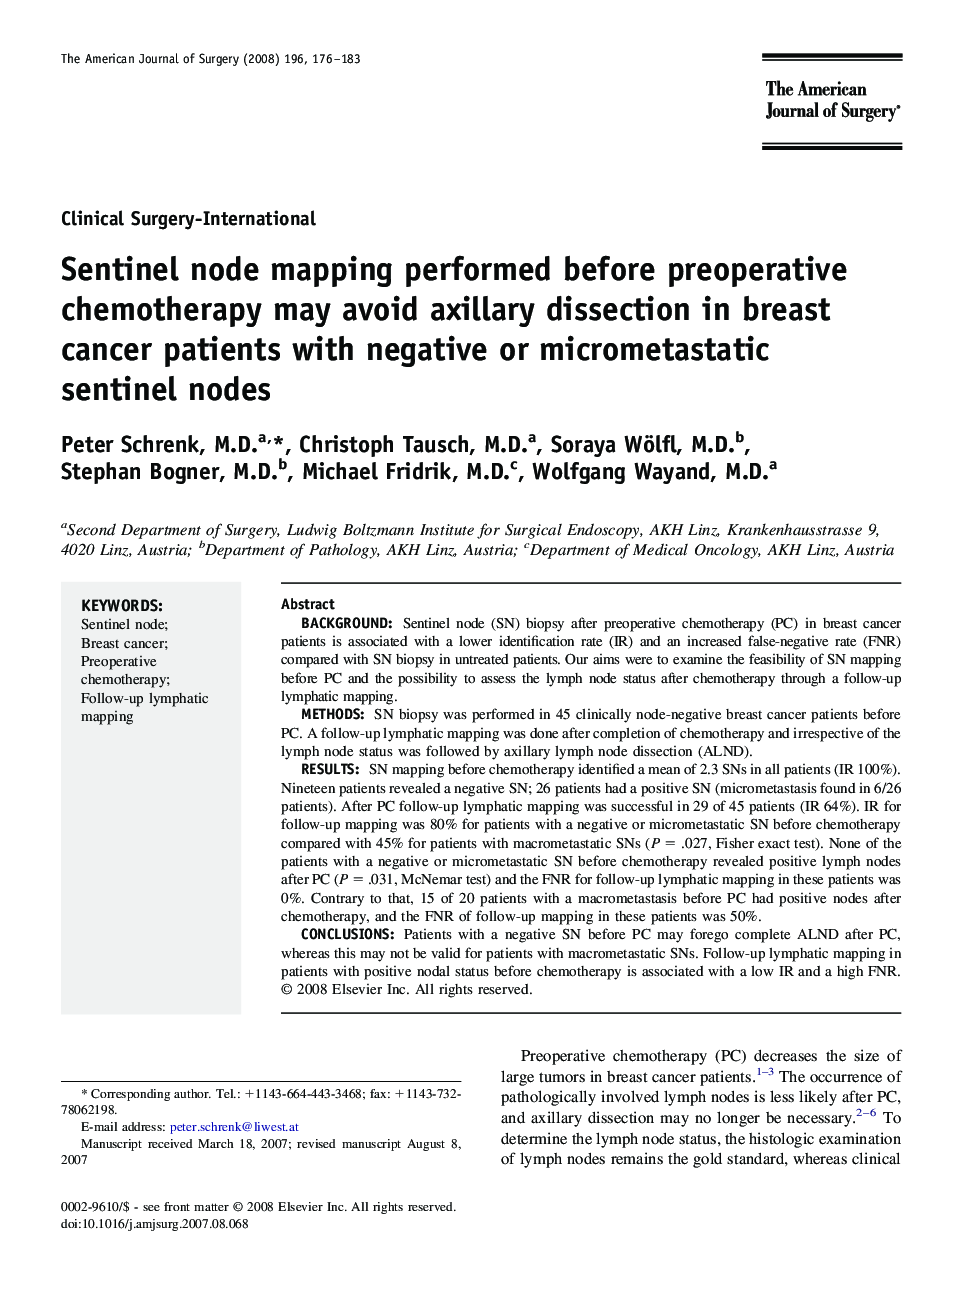 Sentinel node mapping performed before preoperative chemotherapy may avoid axillary dissection in breast cancer patients with negative or micrometastatic sentinel nodes